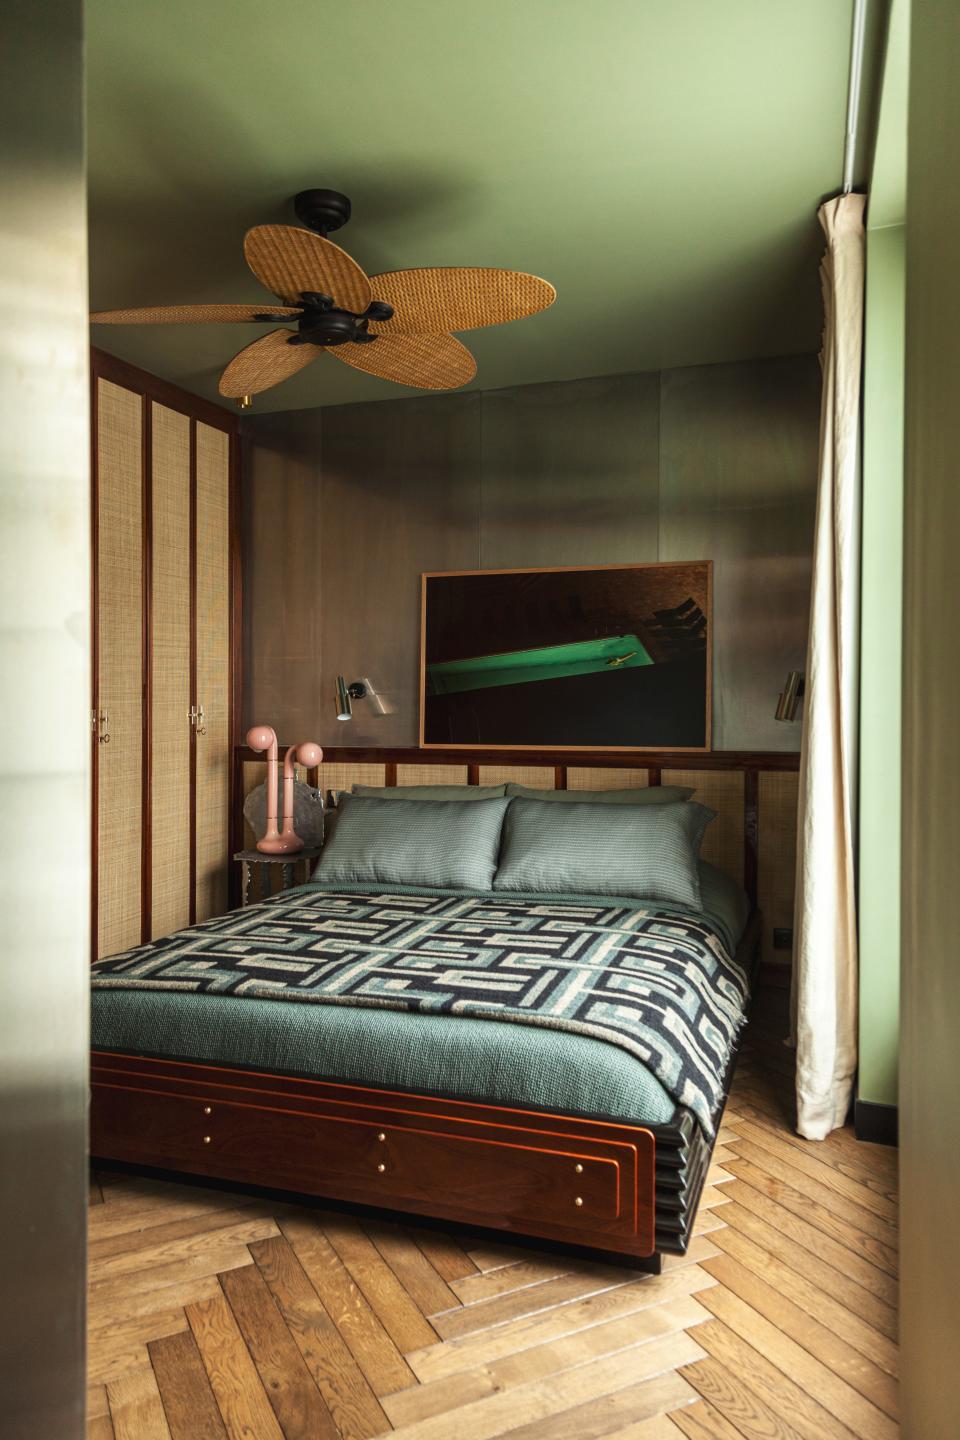 In the bedroom, painted in Lichen green by Farrow & Ball, Hugo Toro designed the bed. The Alualéatoure chair by Hélène de Saint Lager is used as a nightstand with a pink ceramic lamp by Entler Studio. The photo is by Clément Jolin, the curtains are by Silva Créations, and the bedding is by Society Limonta.